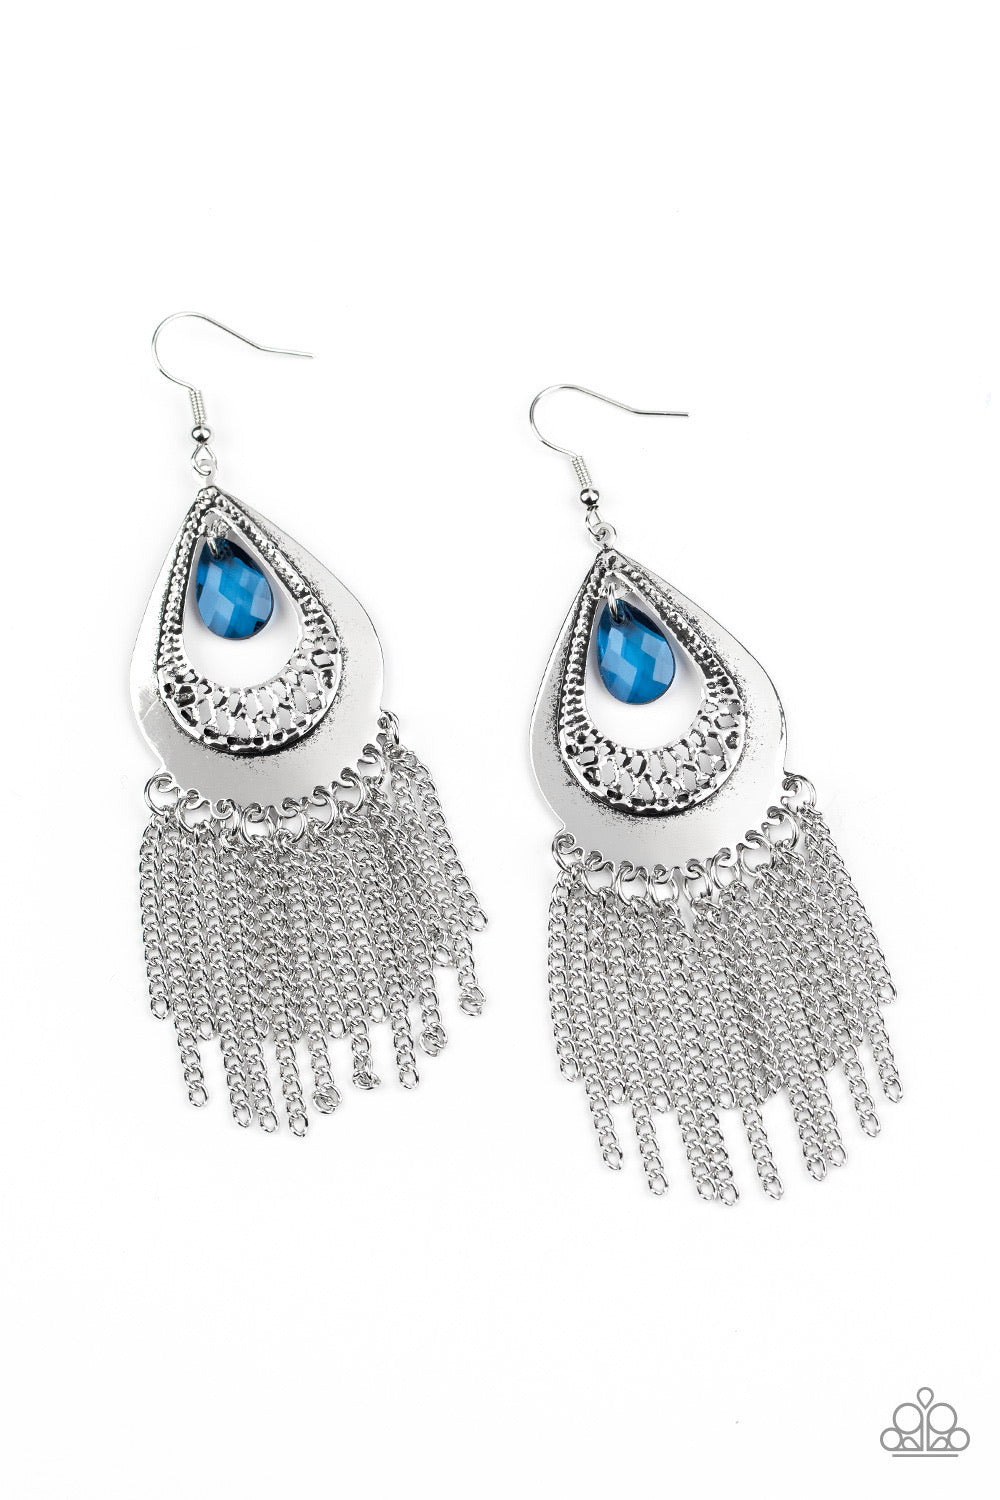 Paparazzi Earrings -   Scattered Storms - Blue